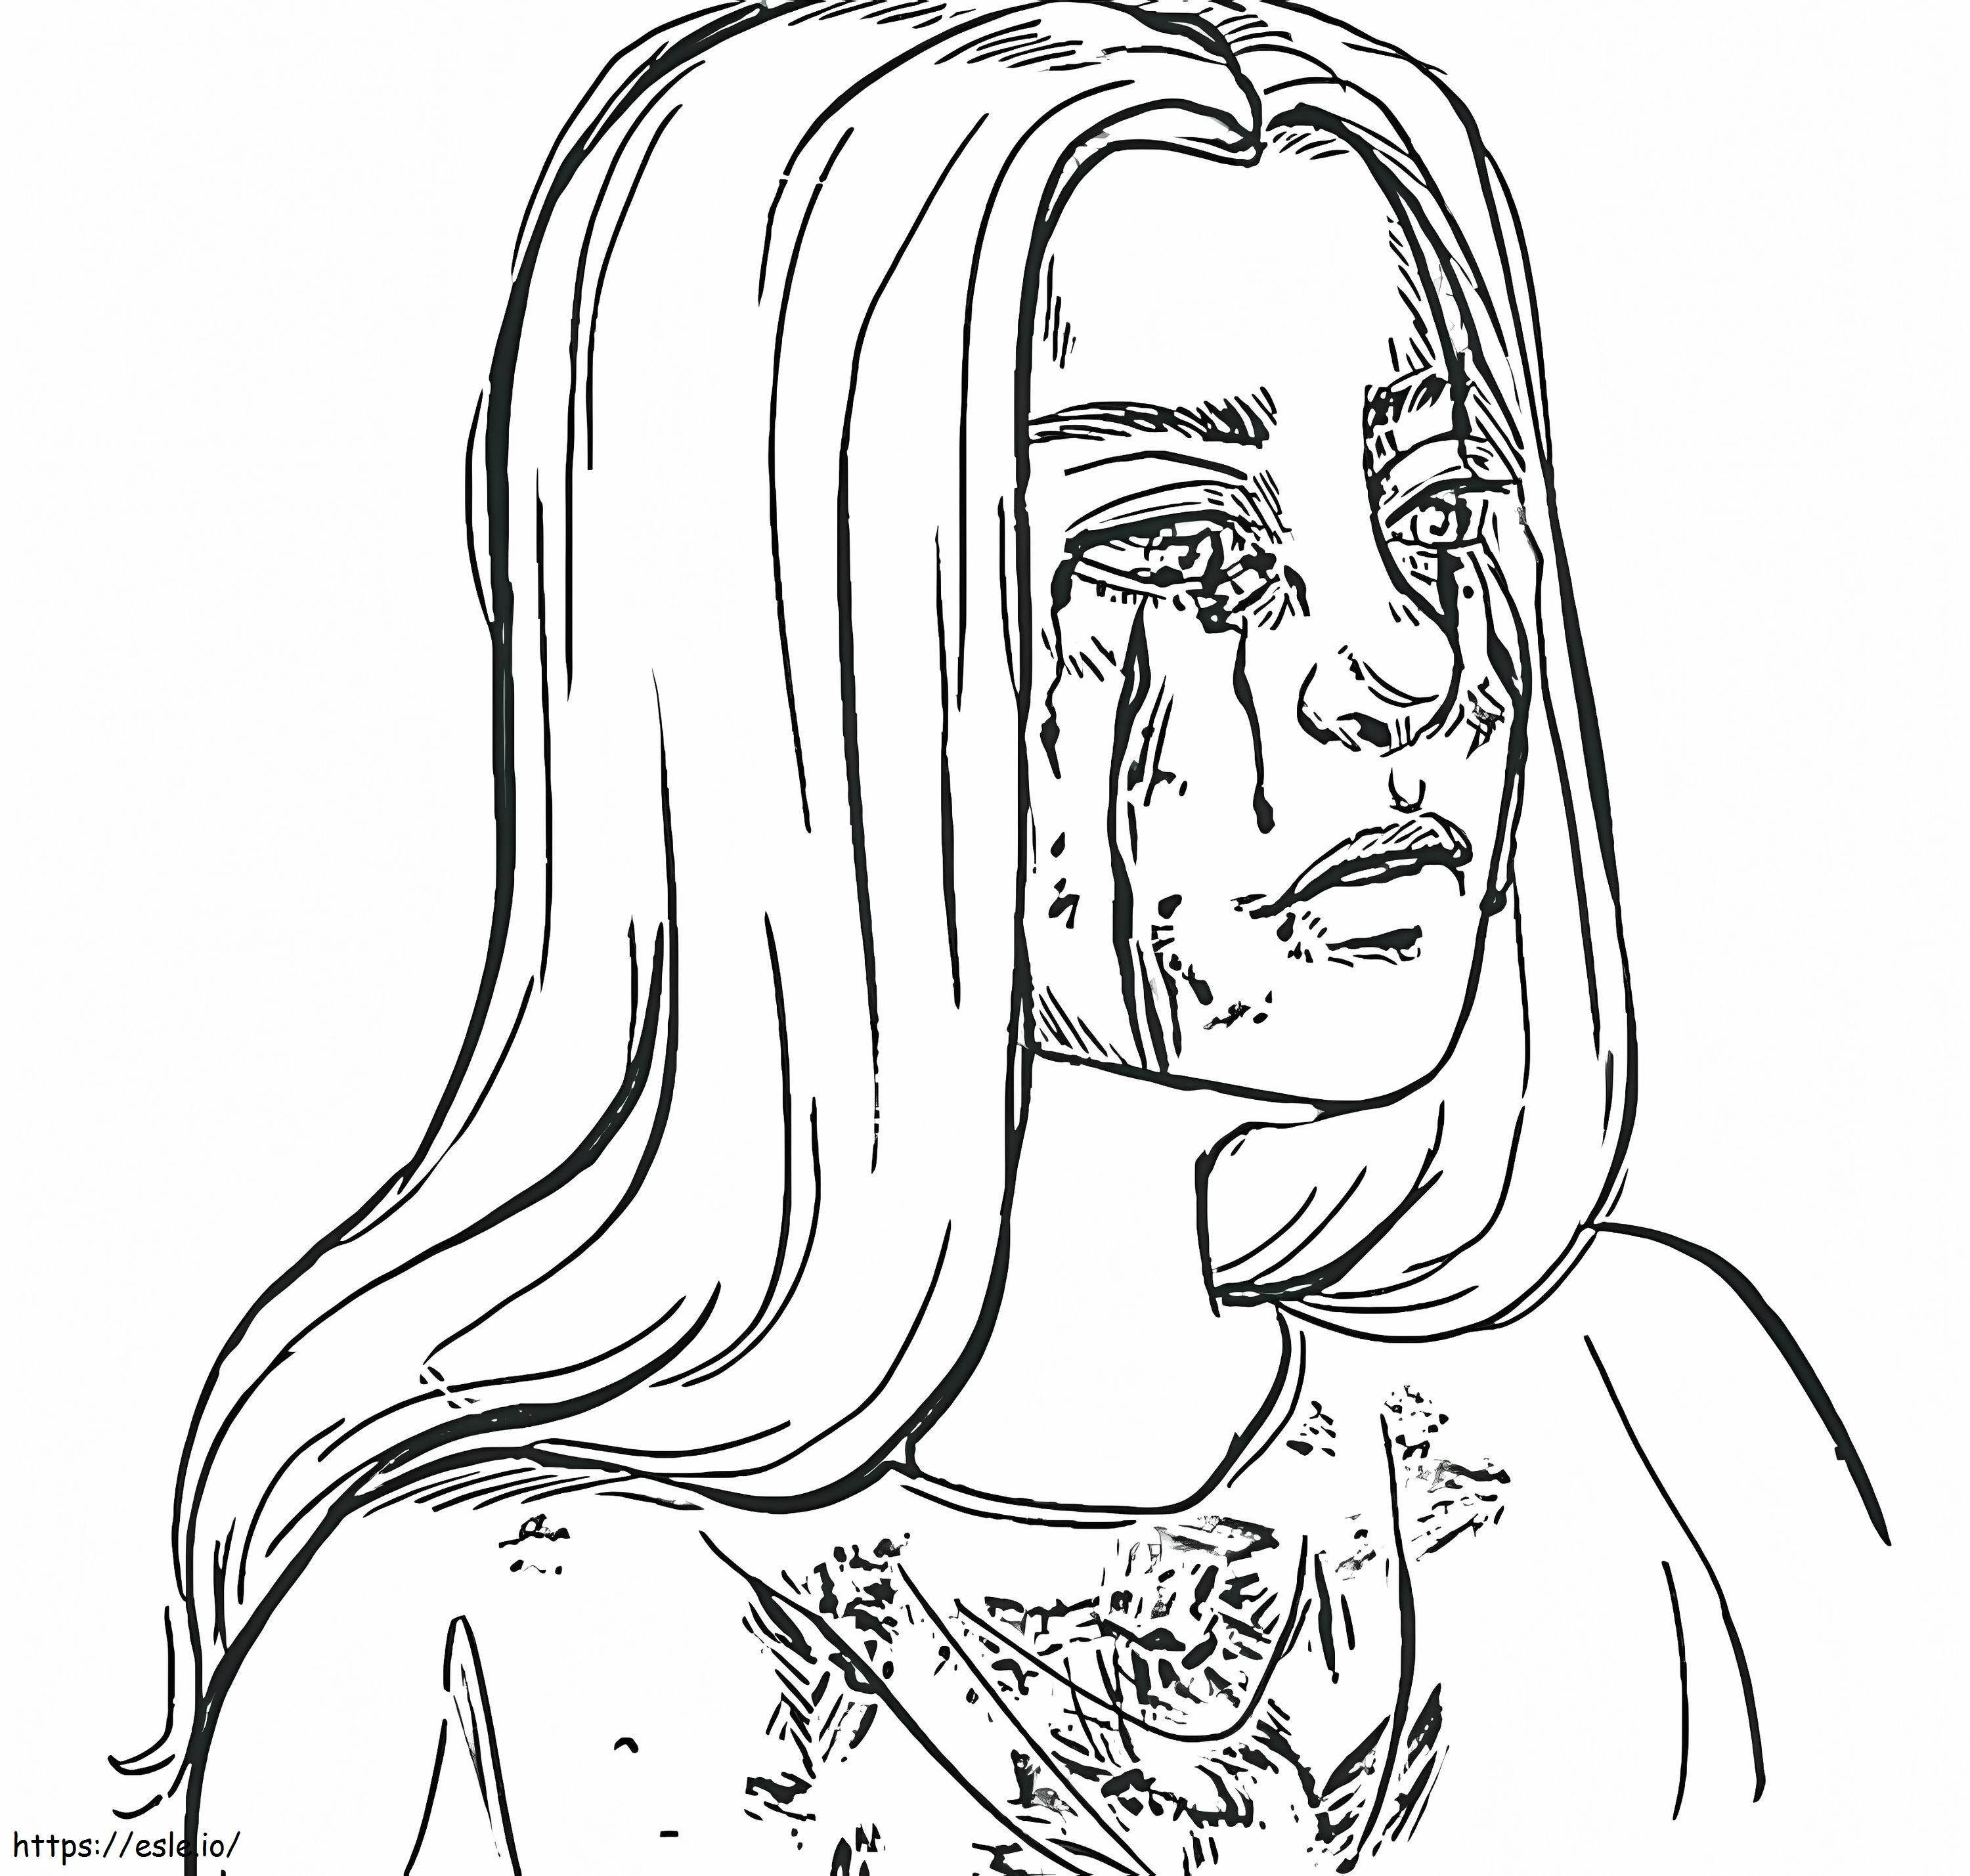 Billie Eilish With Black Tears coloring page